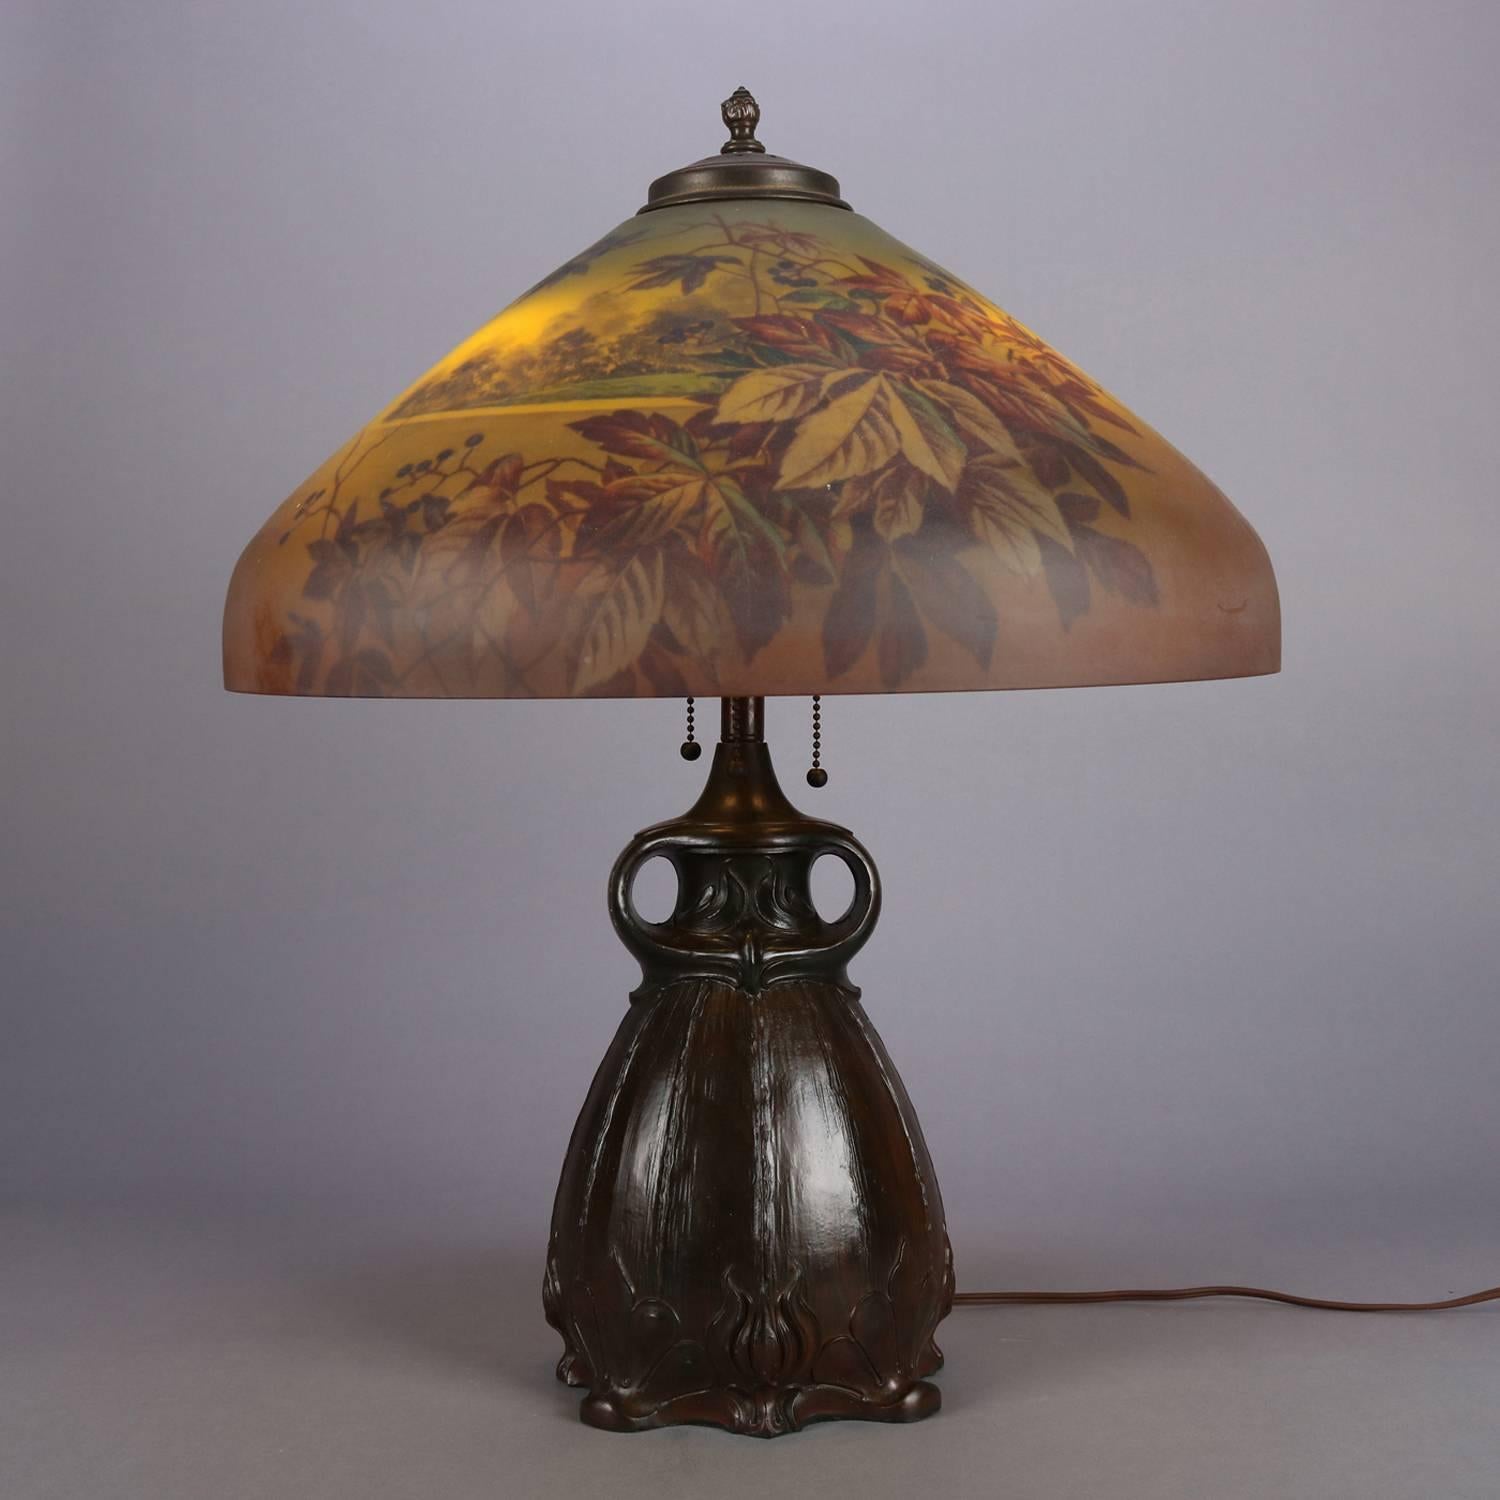 20th Century Arts & Crafts Table Handel Lamp with Pittsburgh School Reverse Painted Shade